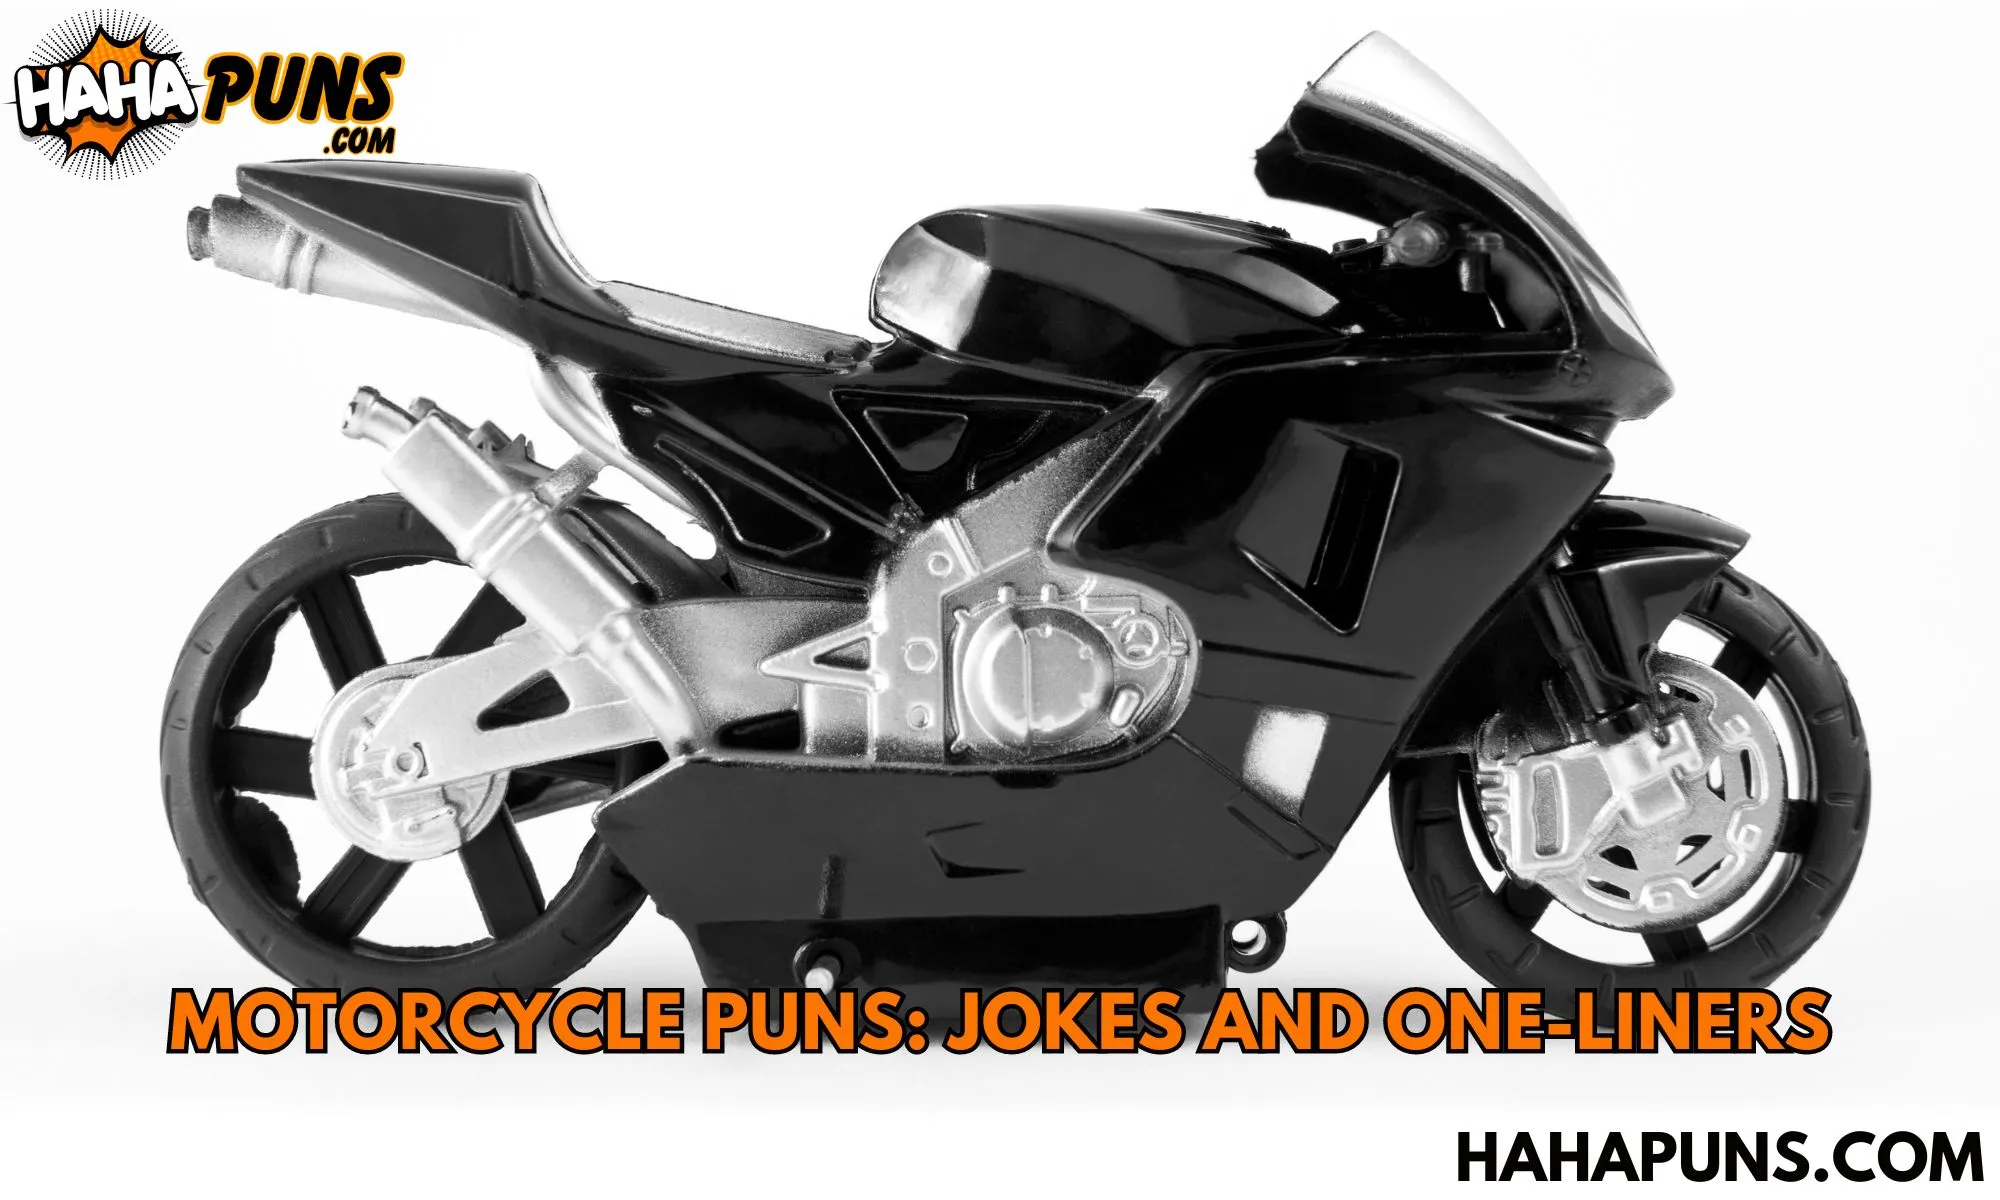 Motorcycle Puns: Jokes And One-Liners